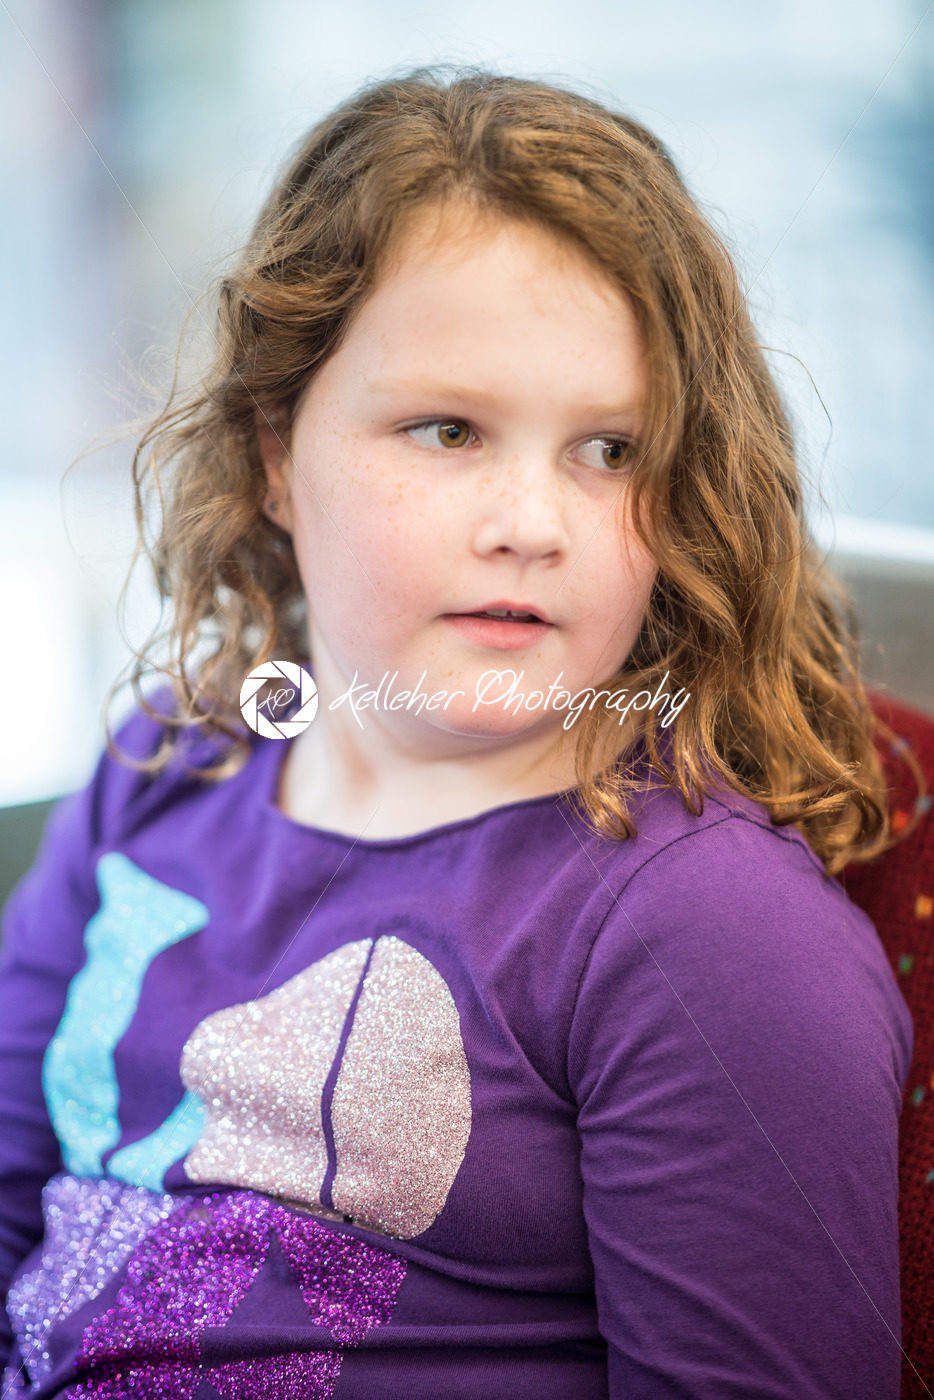 Young little girl portrait looking at somthing - Kelleher Photography Store